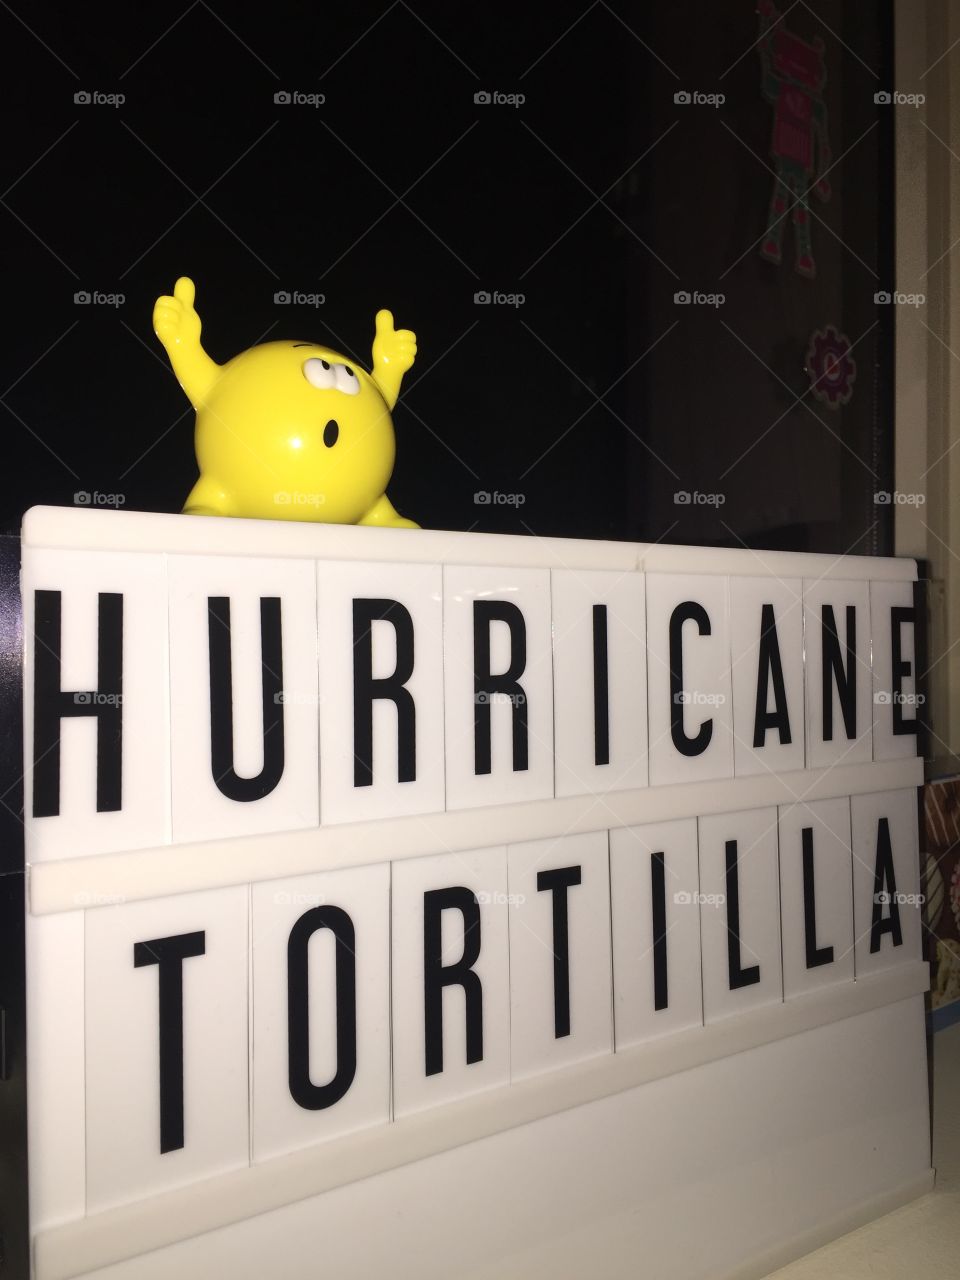 “Hurricane Katrina? More like hurricane Tortilla!” ~ Vine culture has largely and wonderfully impacted our millenial community. Who would have thought that a collection of seven second videos could bring us so much laughter?!